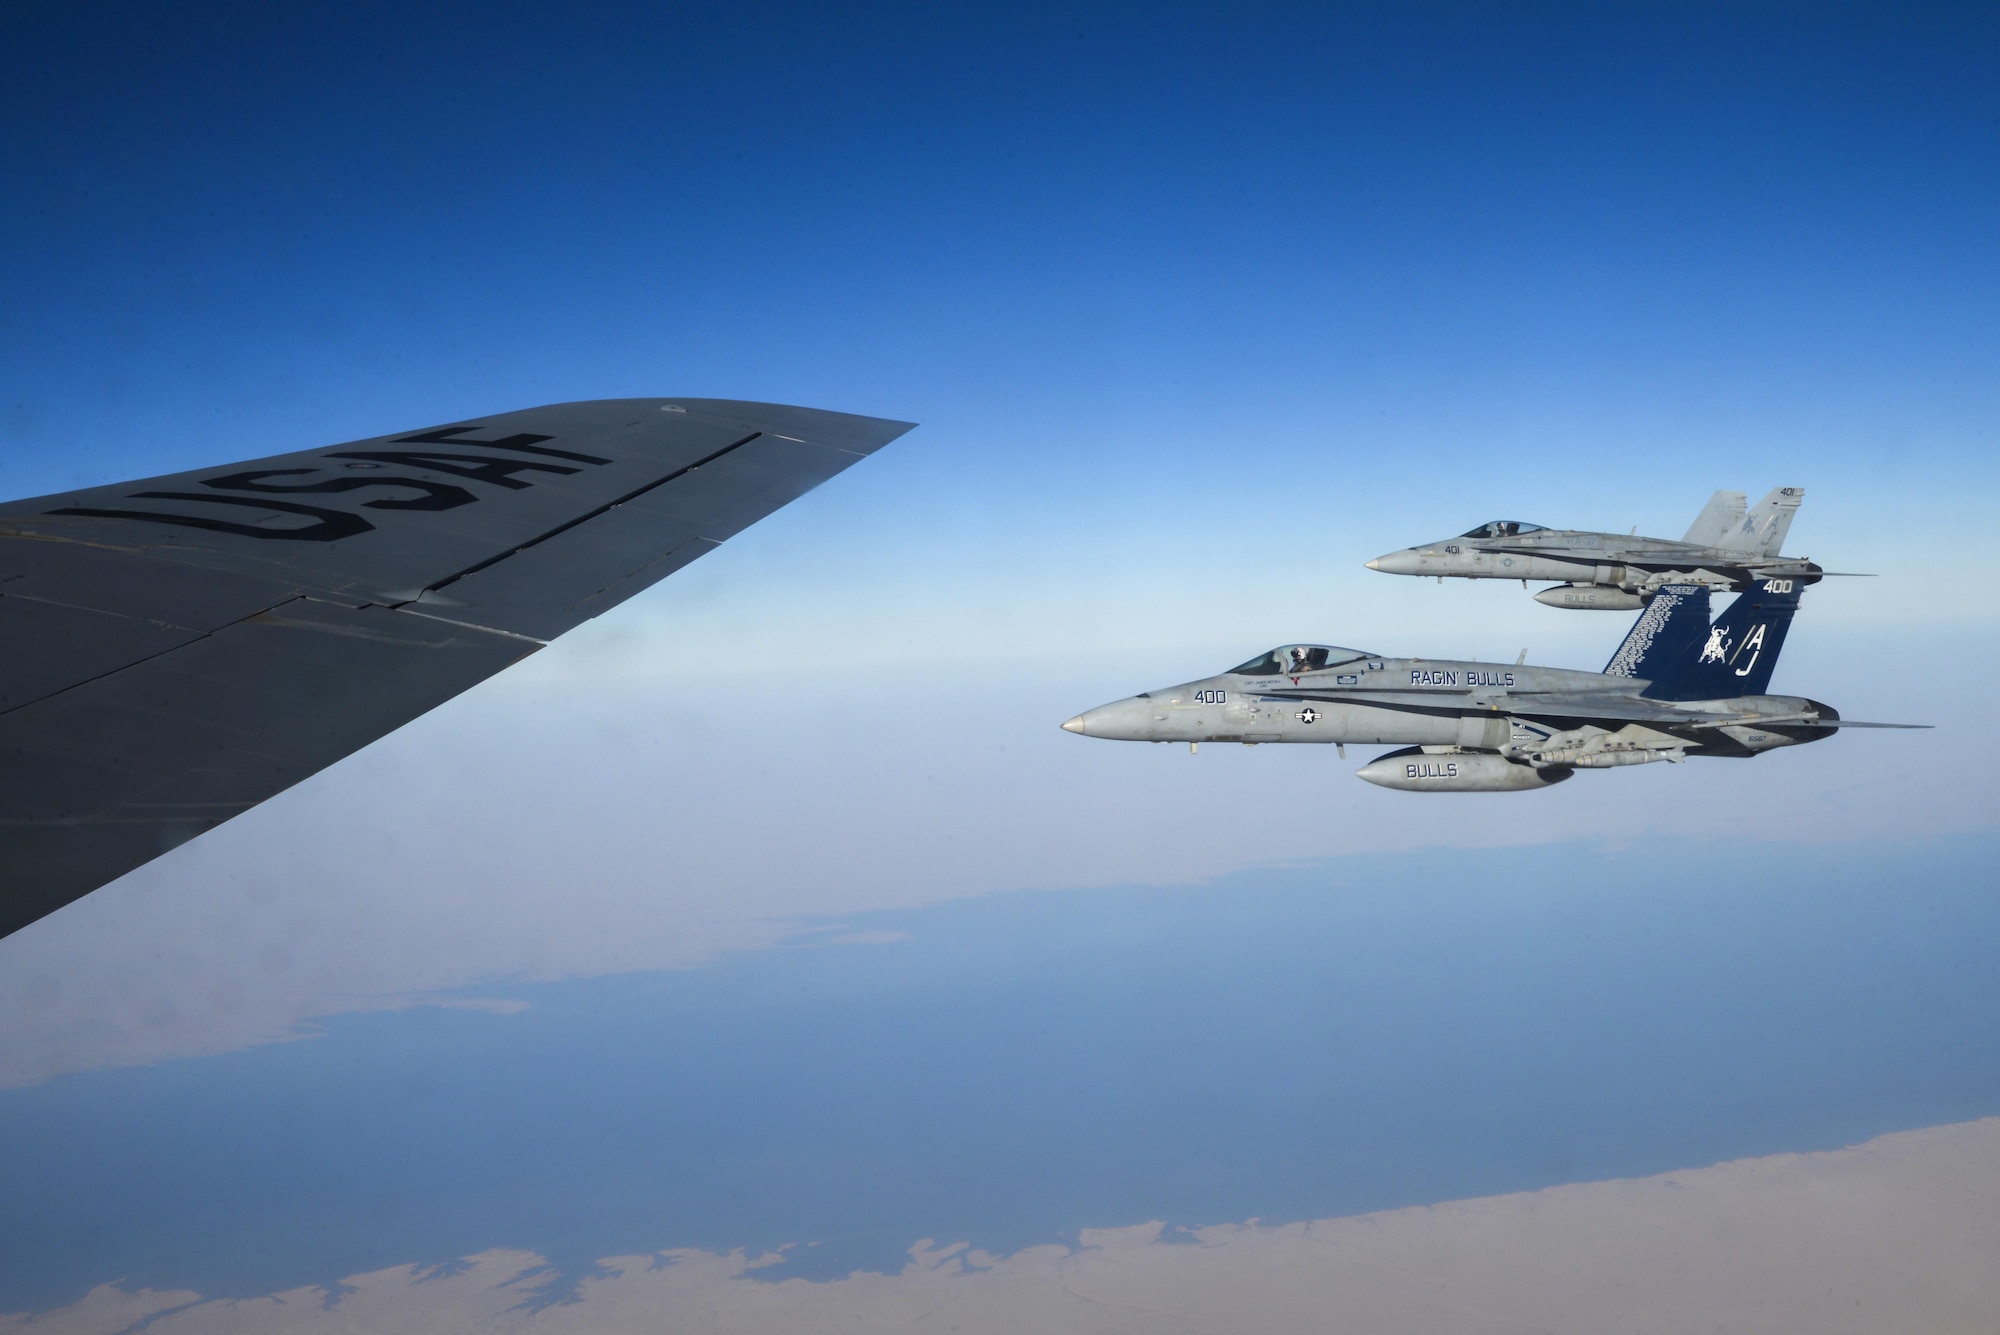 Two U.S. Navy F/A-18Cs from the Strike Fighter Squadron VFA-37 Ragin' Bulls fly in formation alongside a U.S. Air Force KC-135 Stratotanker during a combat refueling mission over Southwest Asia May 21, 2017.  KC-135 Stratotankers, from the 340th Expeditionary Air Refueling Squadron at Al Udeid Air Base, Qatar, maintain a 24/7 presence in the Area Of Responsibility, supporting U.S. and Coalition forces in the air and on the ground, contributing to Operation Inherent Resolve and the fight against ISIS. (U.S. Air National Guard photo by Master Sgt. Andrew J. Moseley/Released)